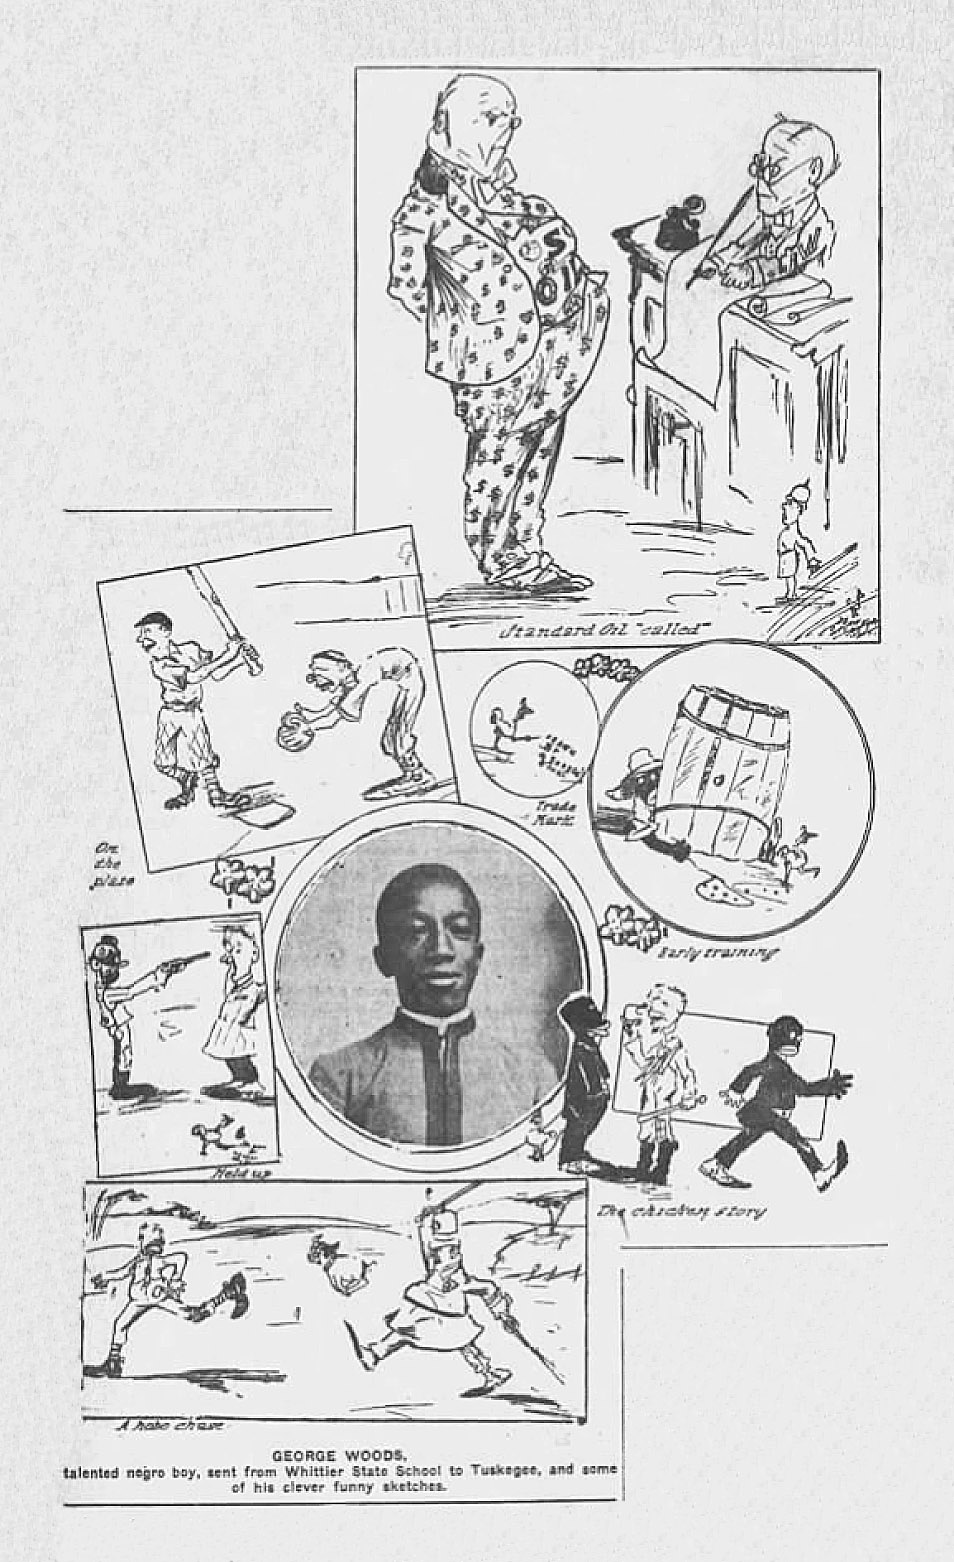 Sketches and photo of george Woods that accopanied the Aug. 5, 1906 LA Times article